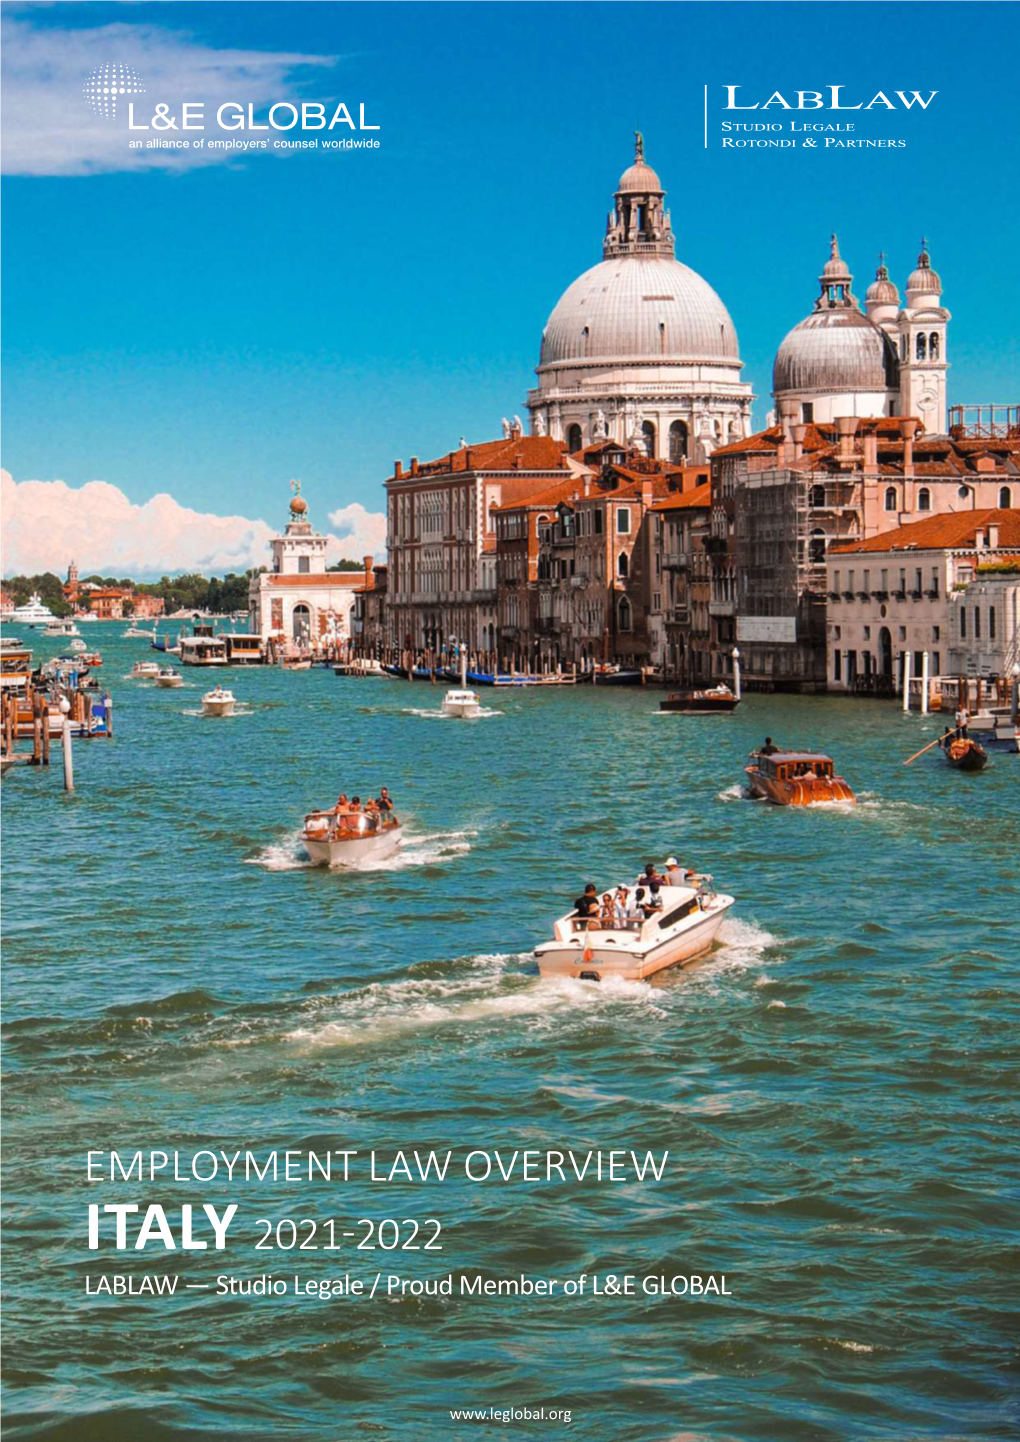 Employment Law Overview Italy 2021-2022 LABLAW — Studio Legale / Proud Member of L&E GLOBAL